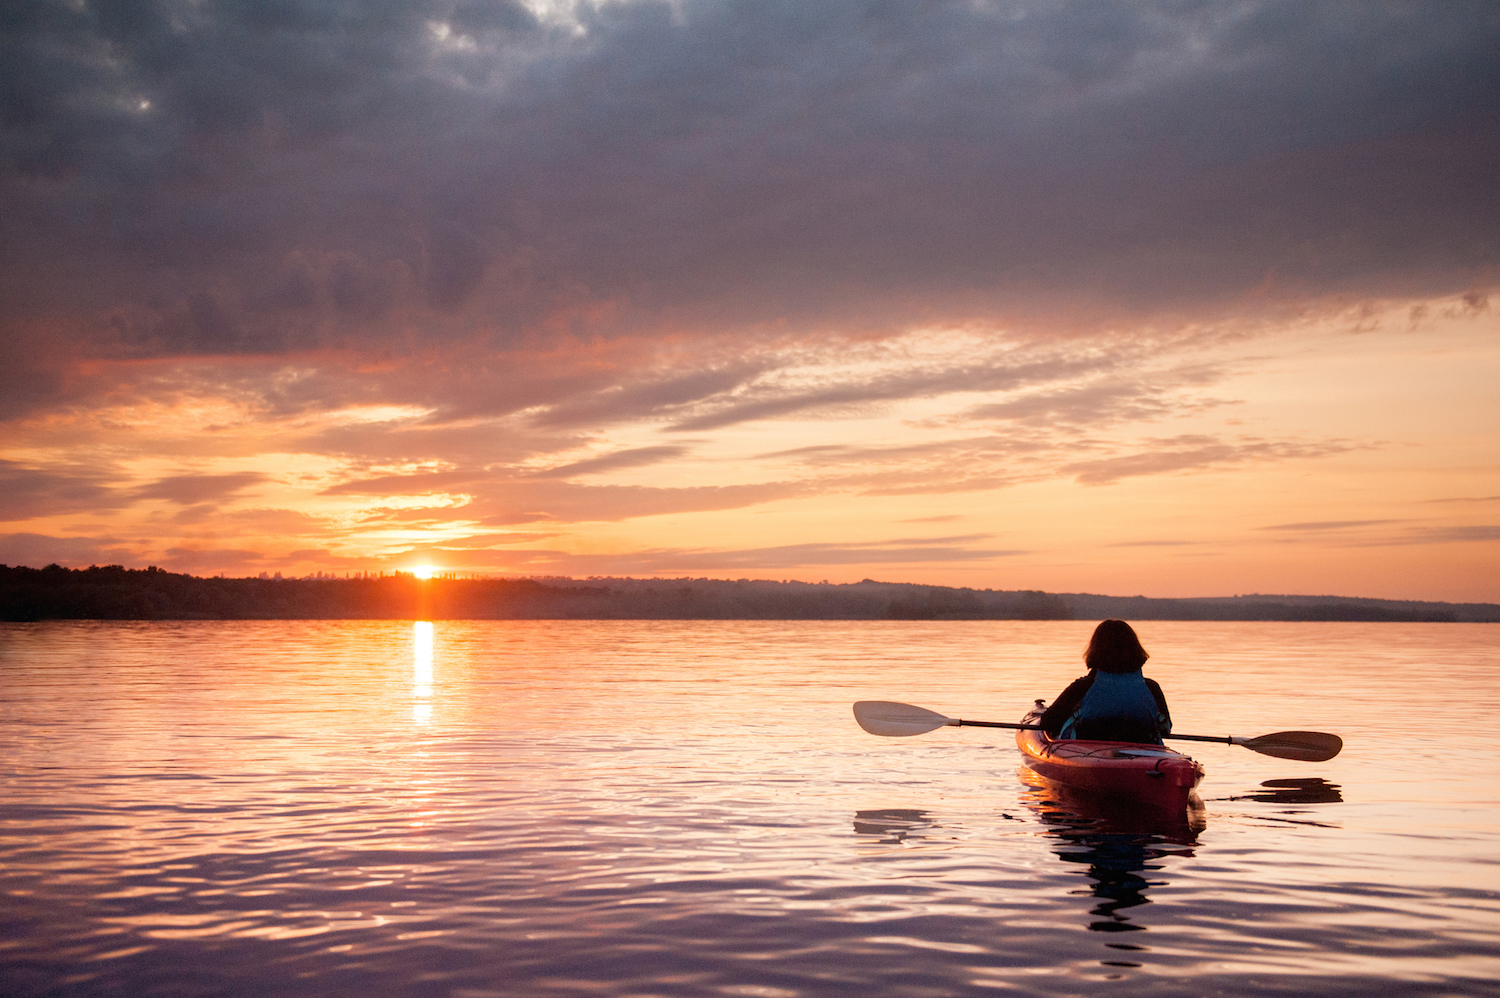 Woman in a kayak on the river on the scenic sunset